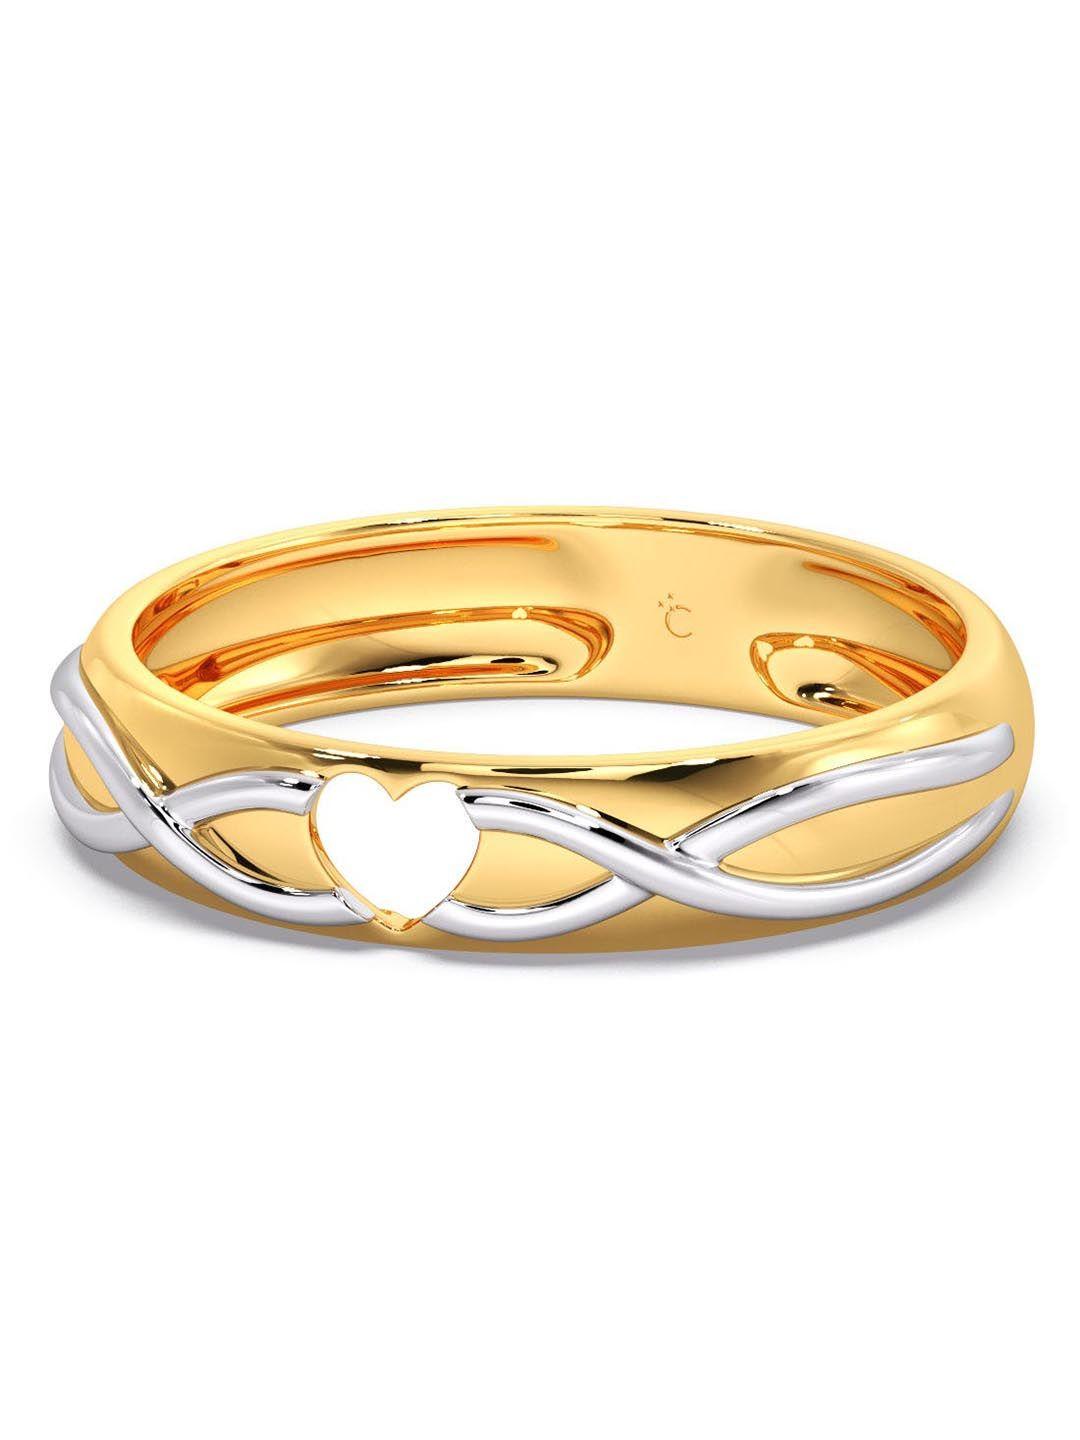 candere a kalyan jewellers company 18kt gold finger ring-2.91gm